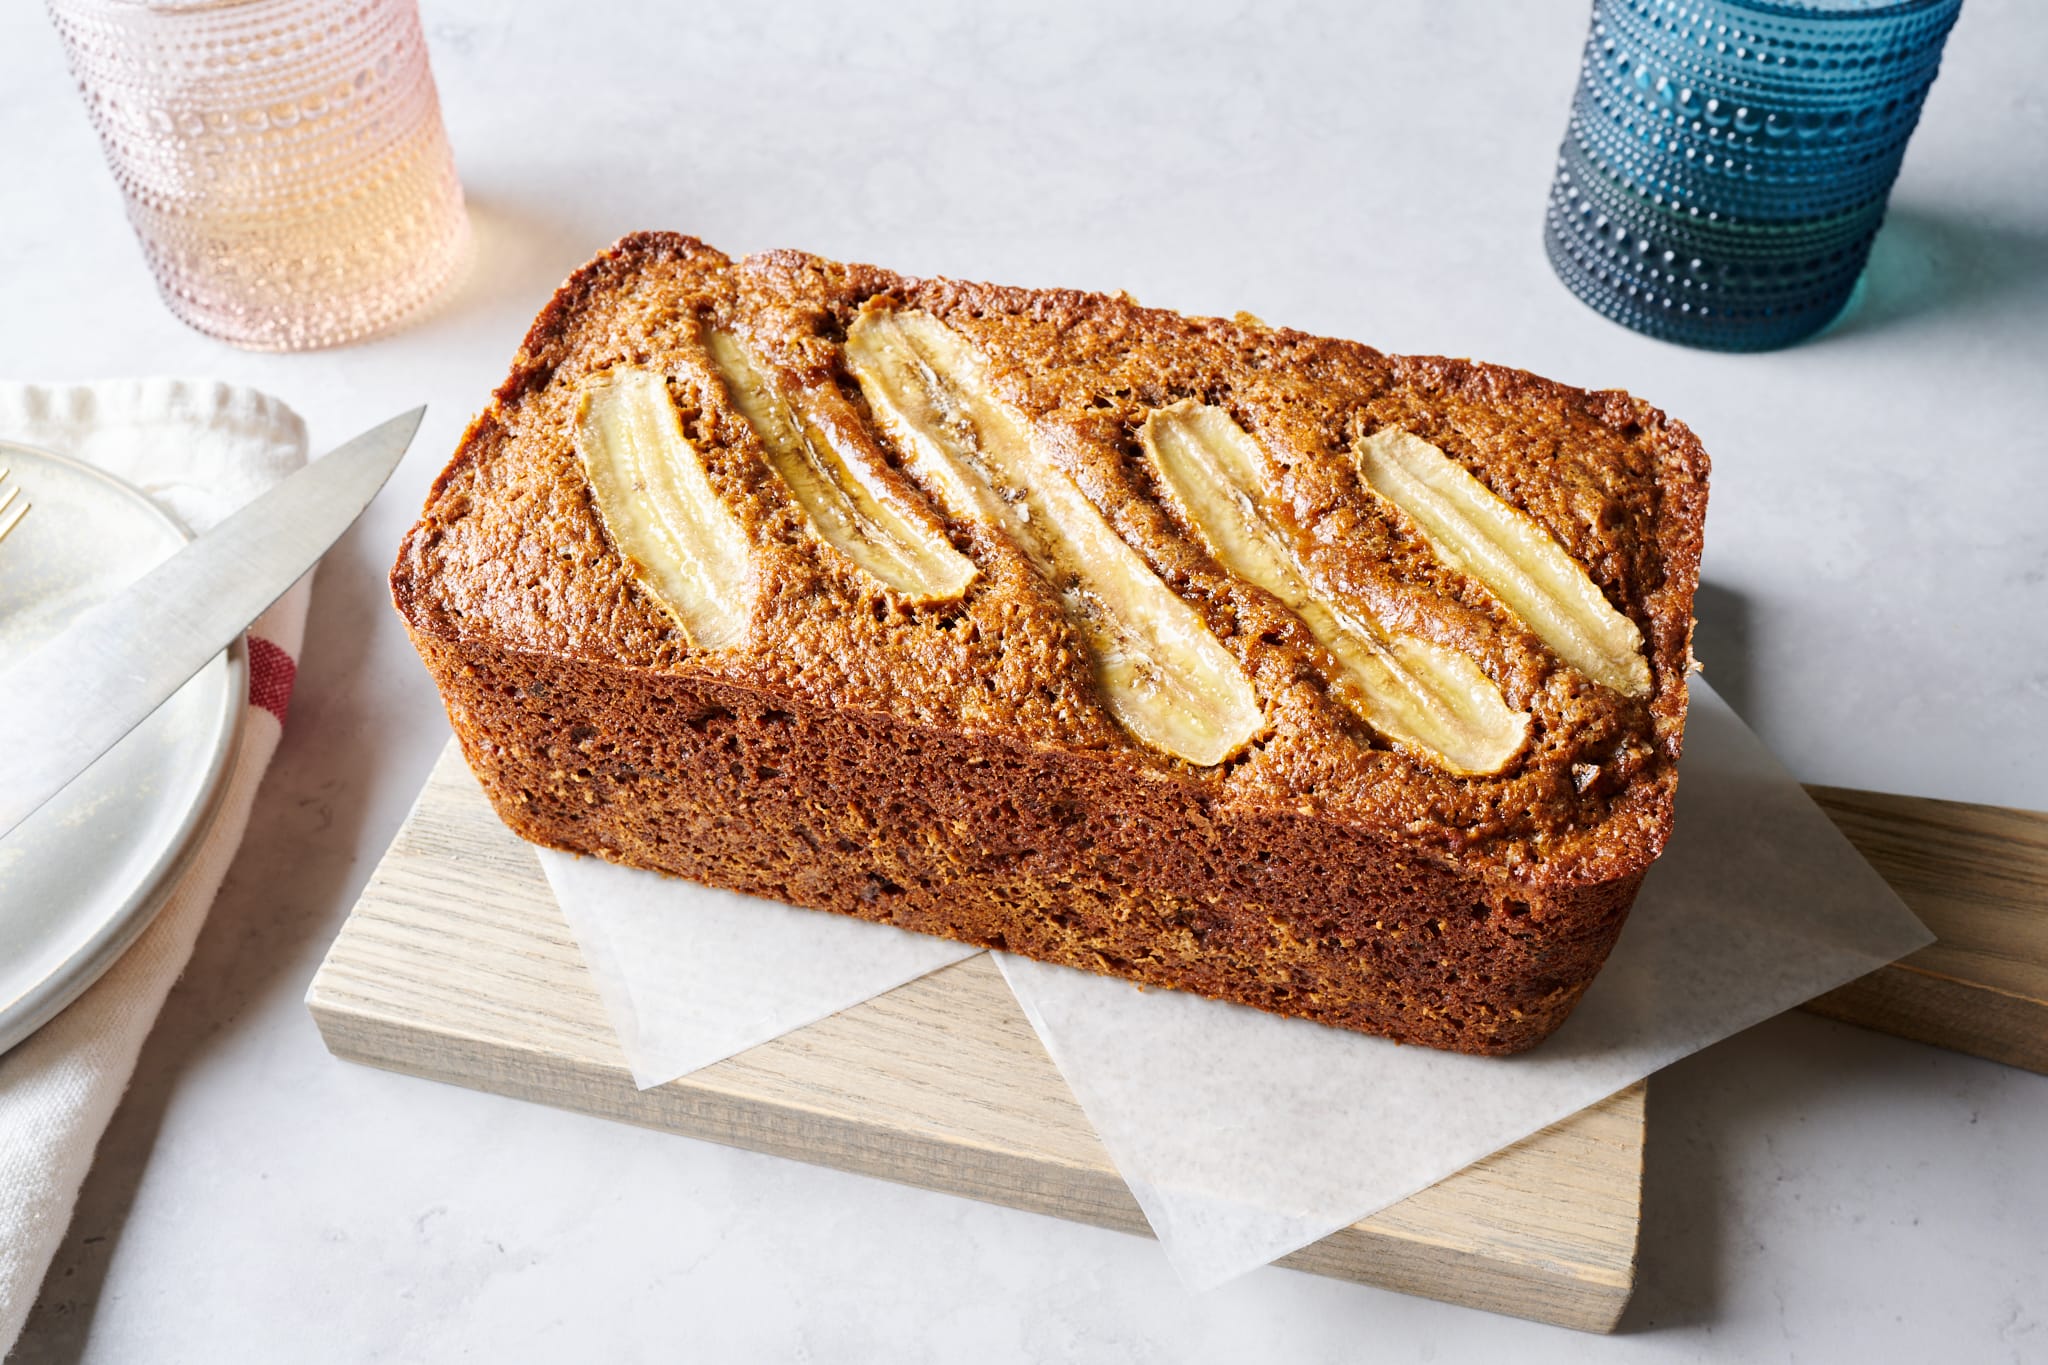 https://www.theperfectloaf.com/wp-content/uploads/2023/04/theperfectloaf_bread_bakers_date_and_banana_tea_cake-2.jpg